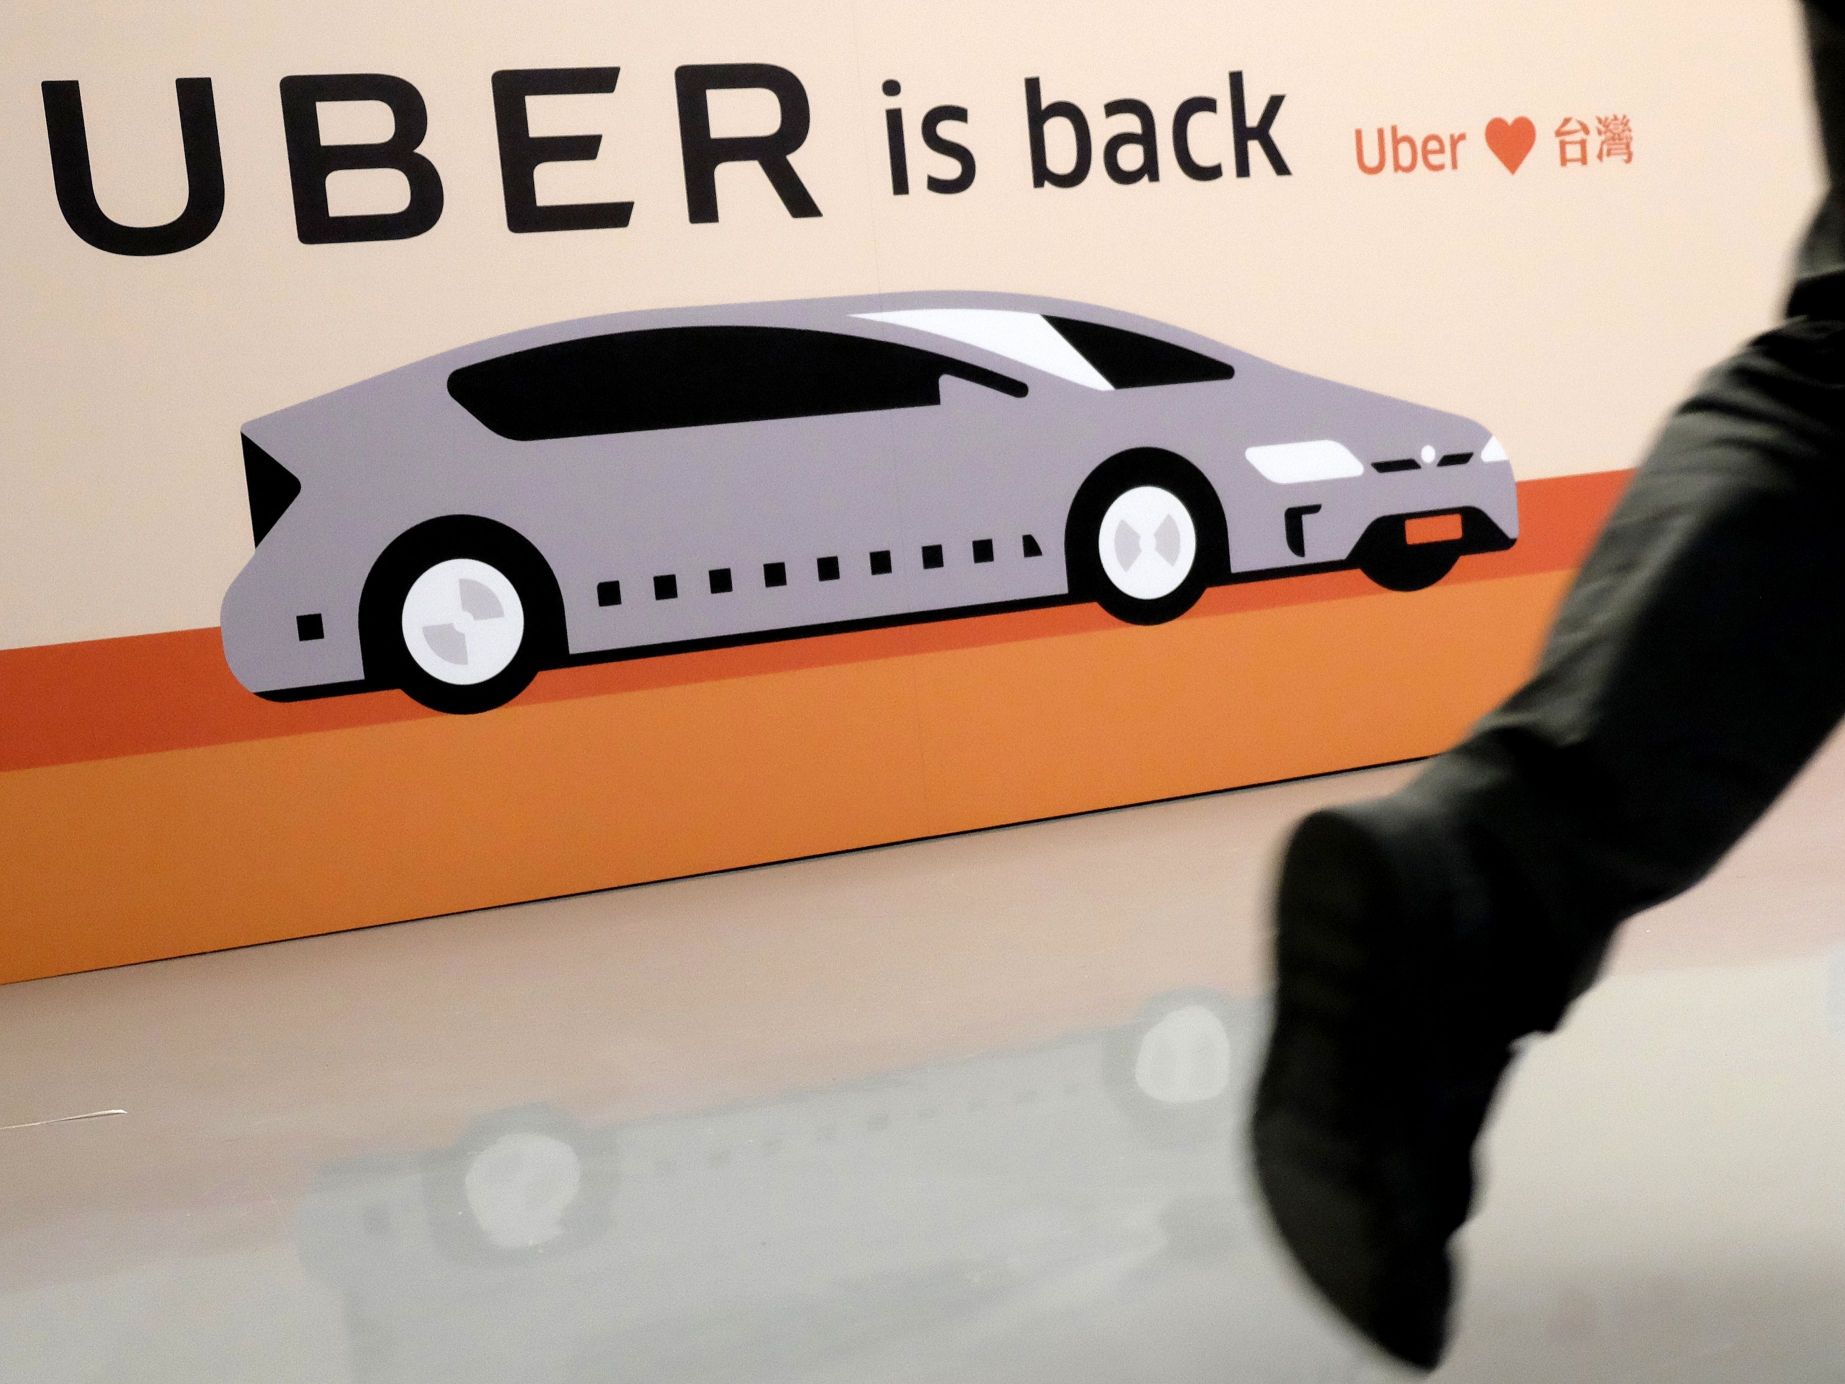 Uber confirms SoftBank has agreed to invest billions in Uber